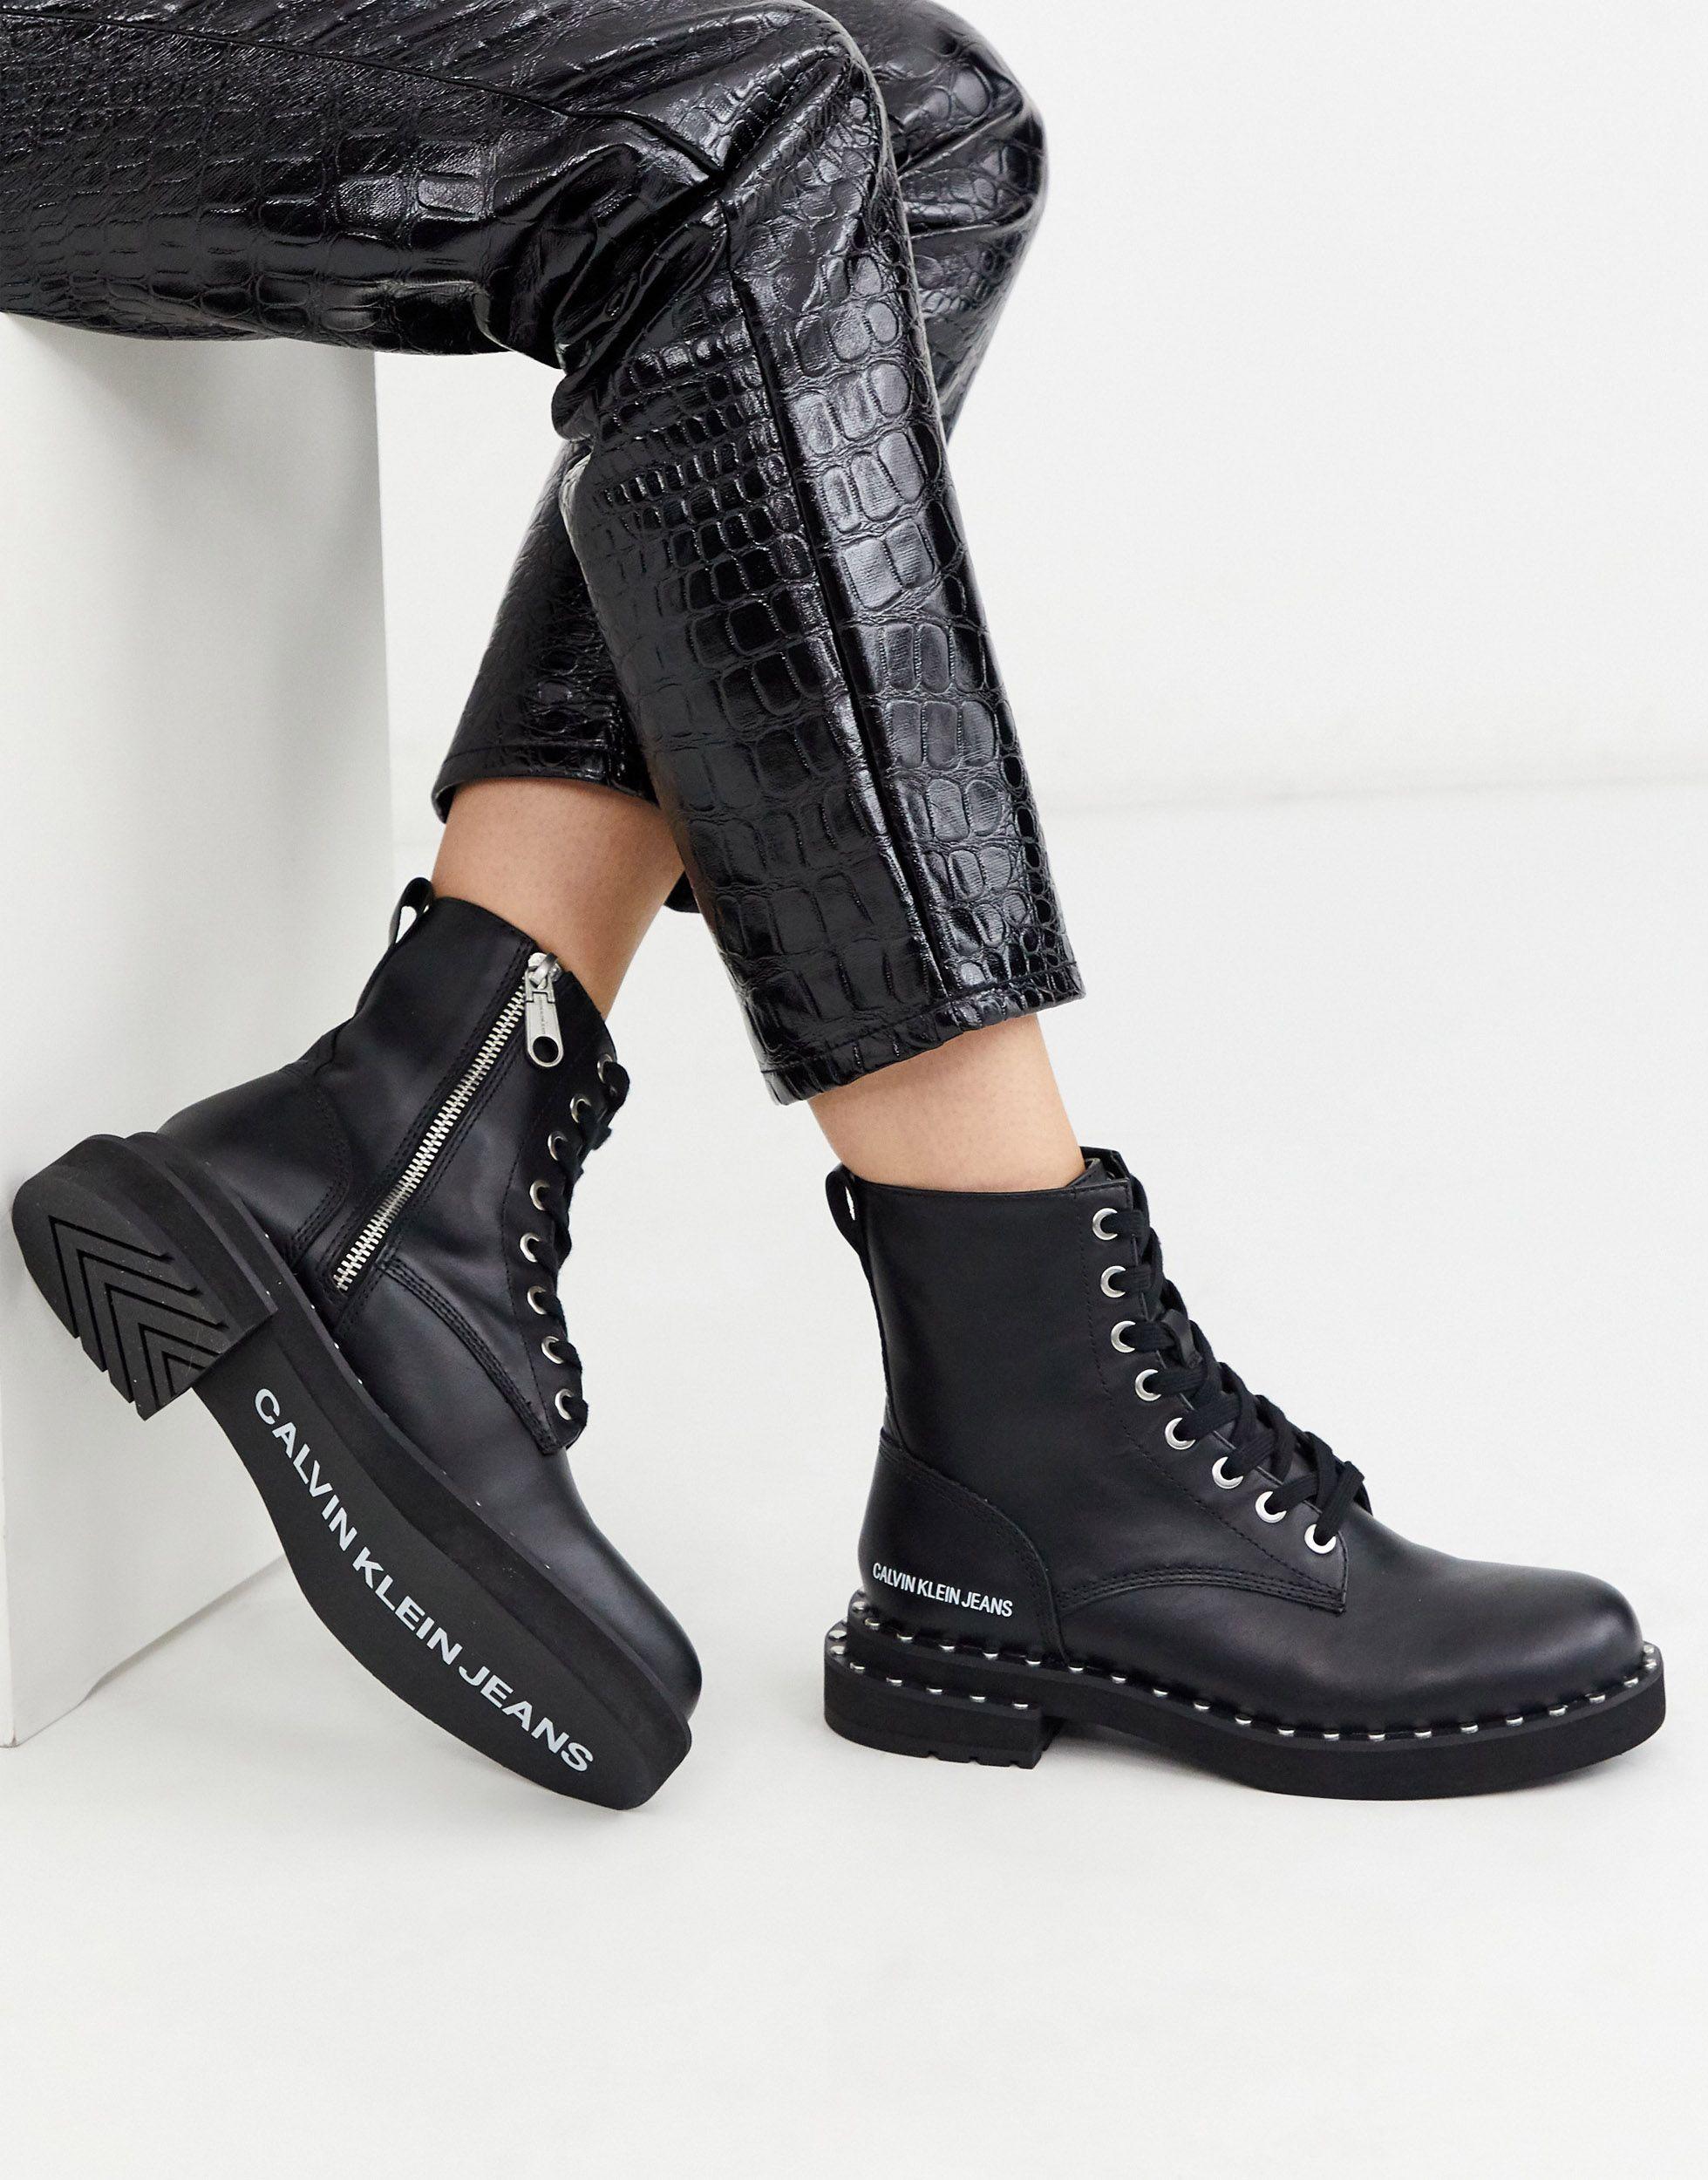 Calvin Klein Denim Studded Chunky Lace Up Ankle Boots in Black | Lyst